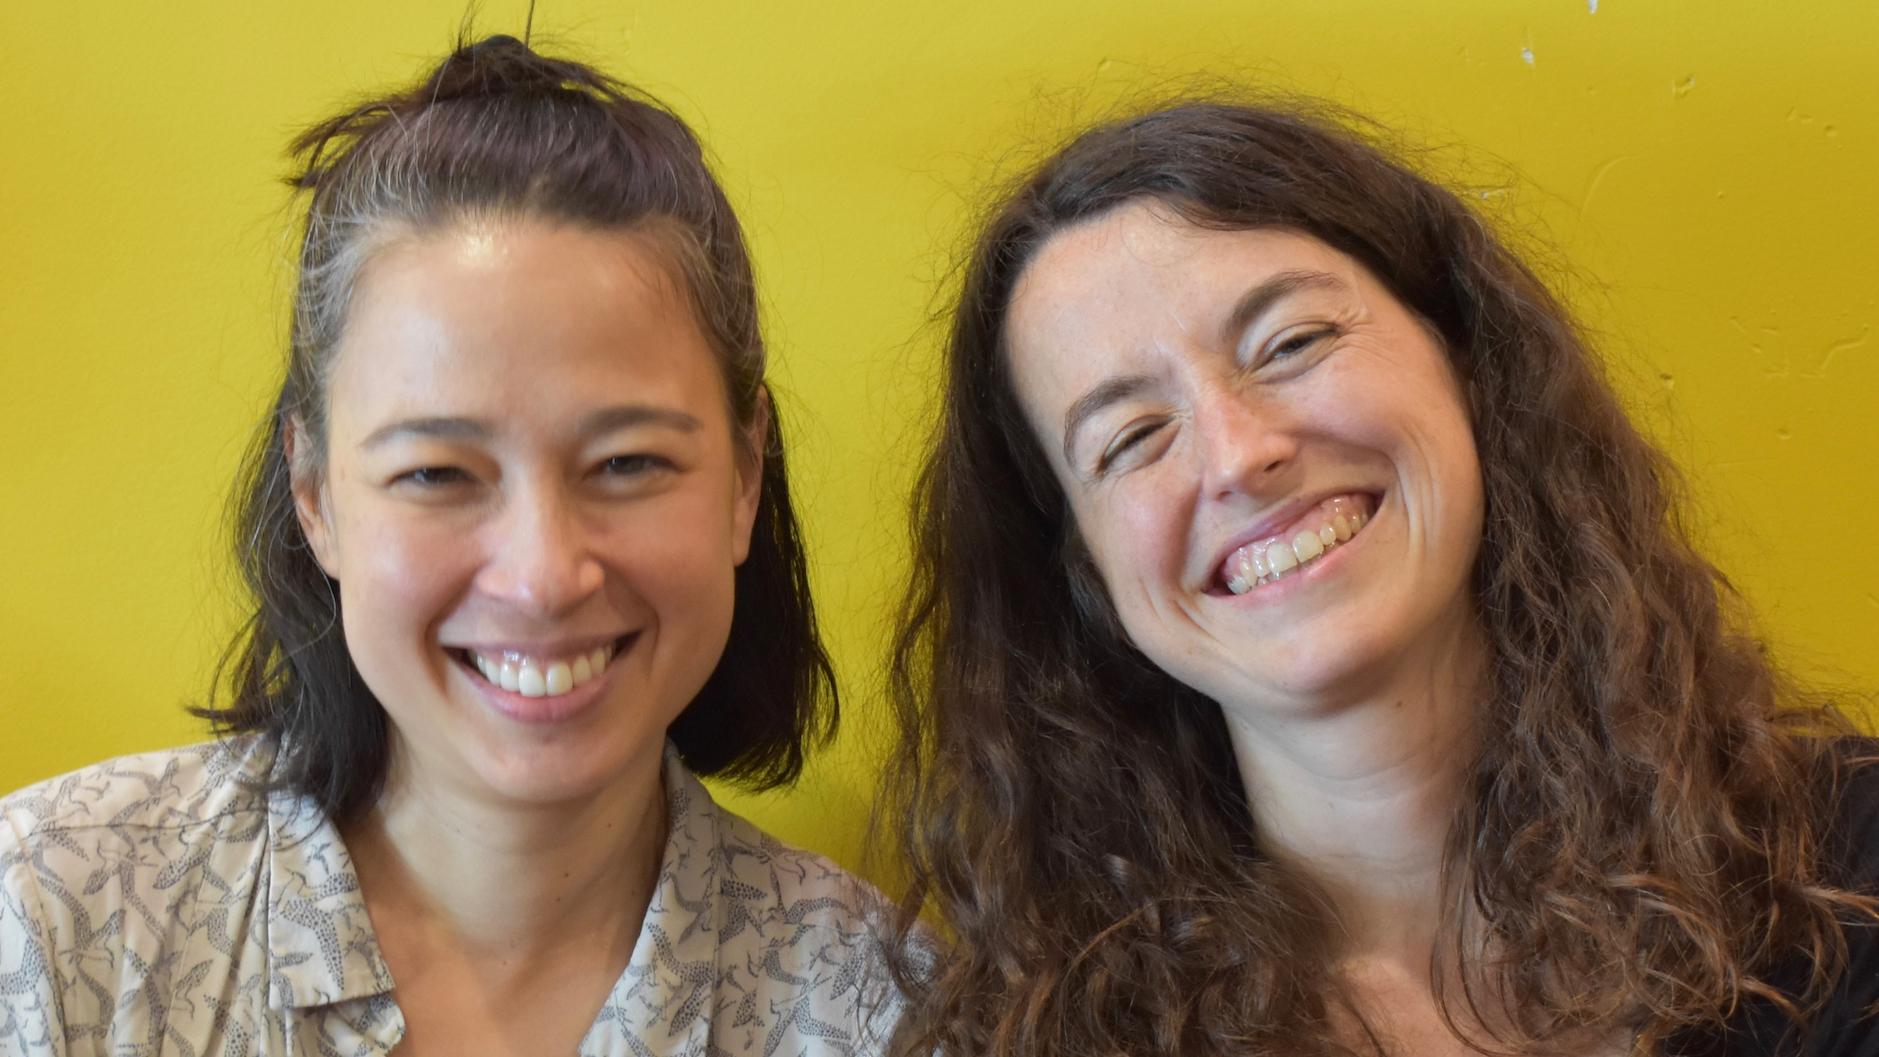 Professors Valentine Hacquard and Ellen Lau, with broadly smiling faces, sitting together in front of a bright yellow wall